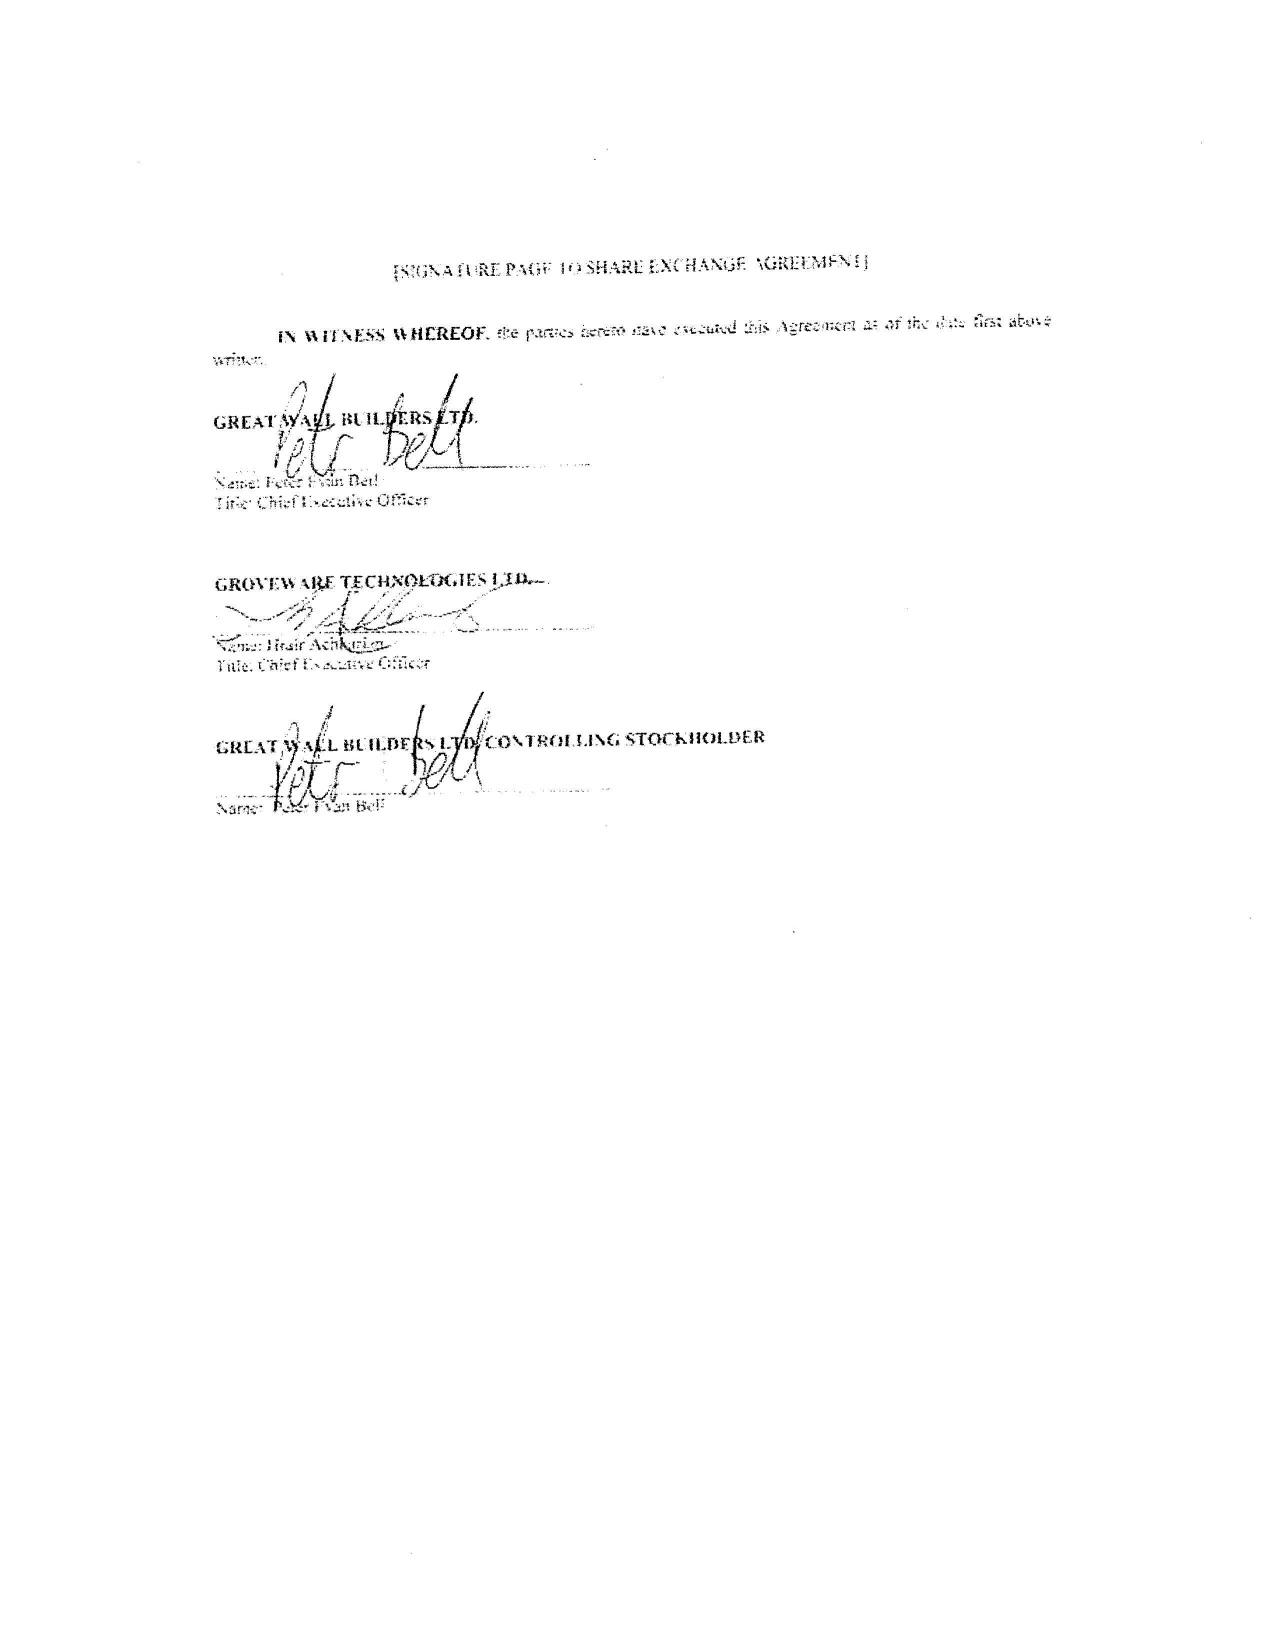 Share Exchange Agreement - Page 16.